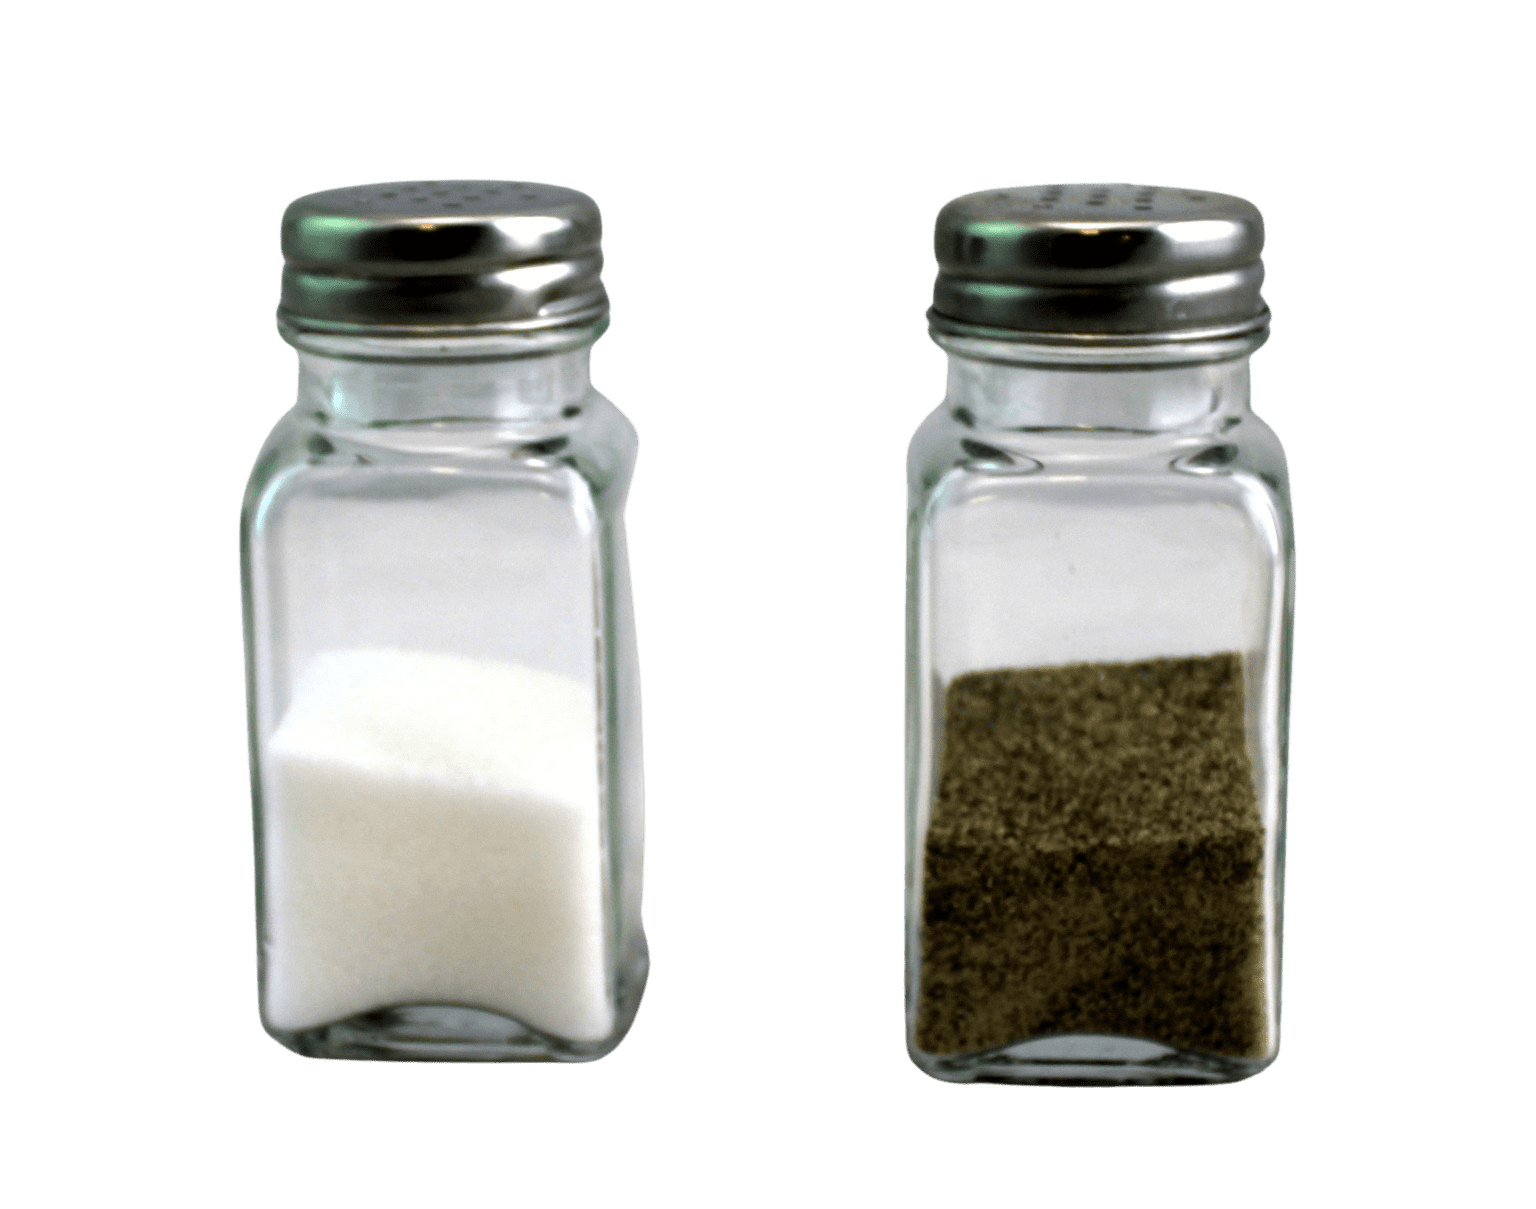 and Seasoning Spices by Hawbys Stainless Steel Salt Shaker with Glass Base Easy Refill and Cleaning with Adjustable Pour Holes Salt and Pepper Shakers Set Kosher Salt Himalayan Salt